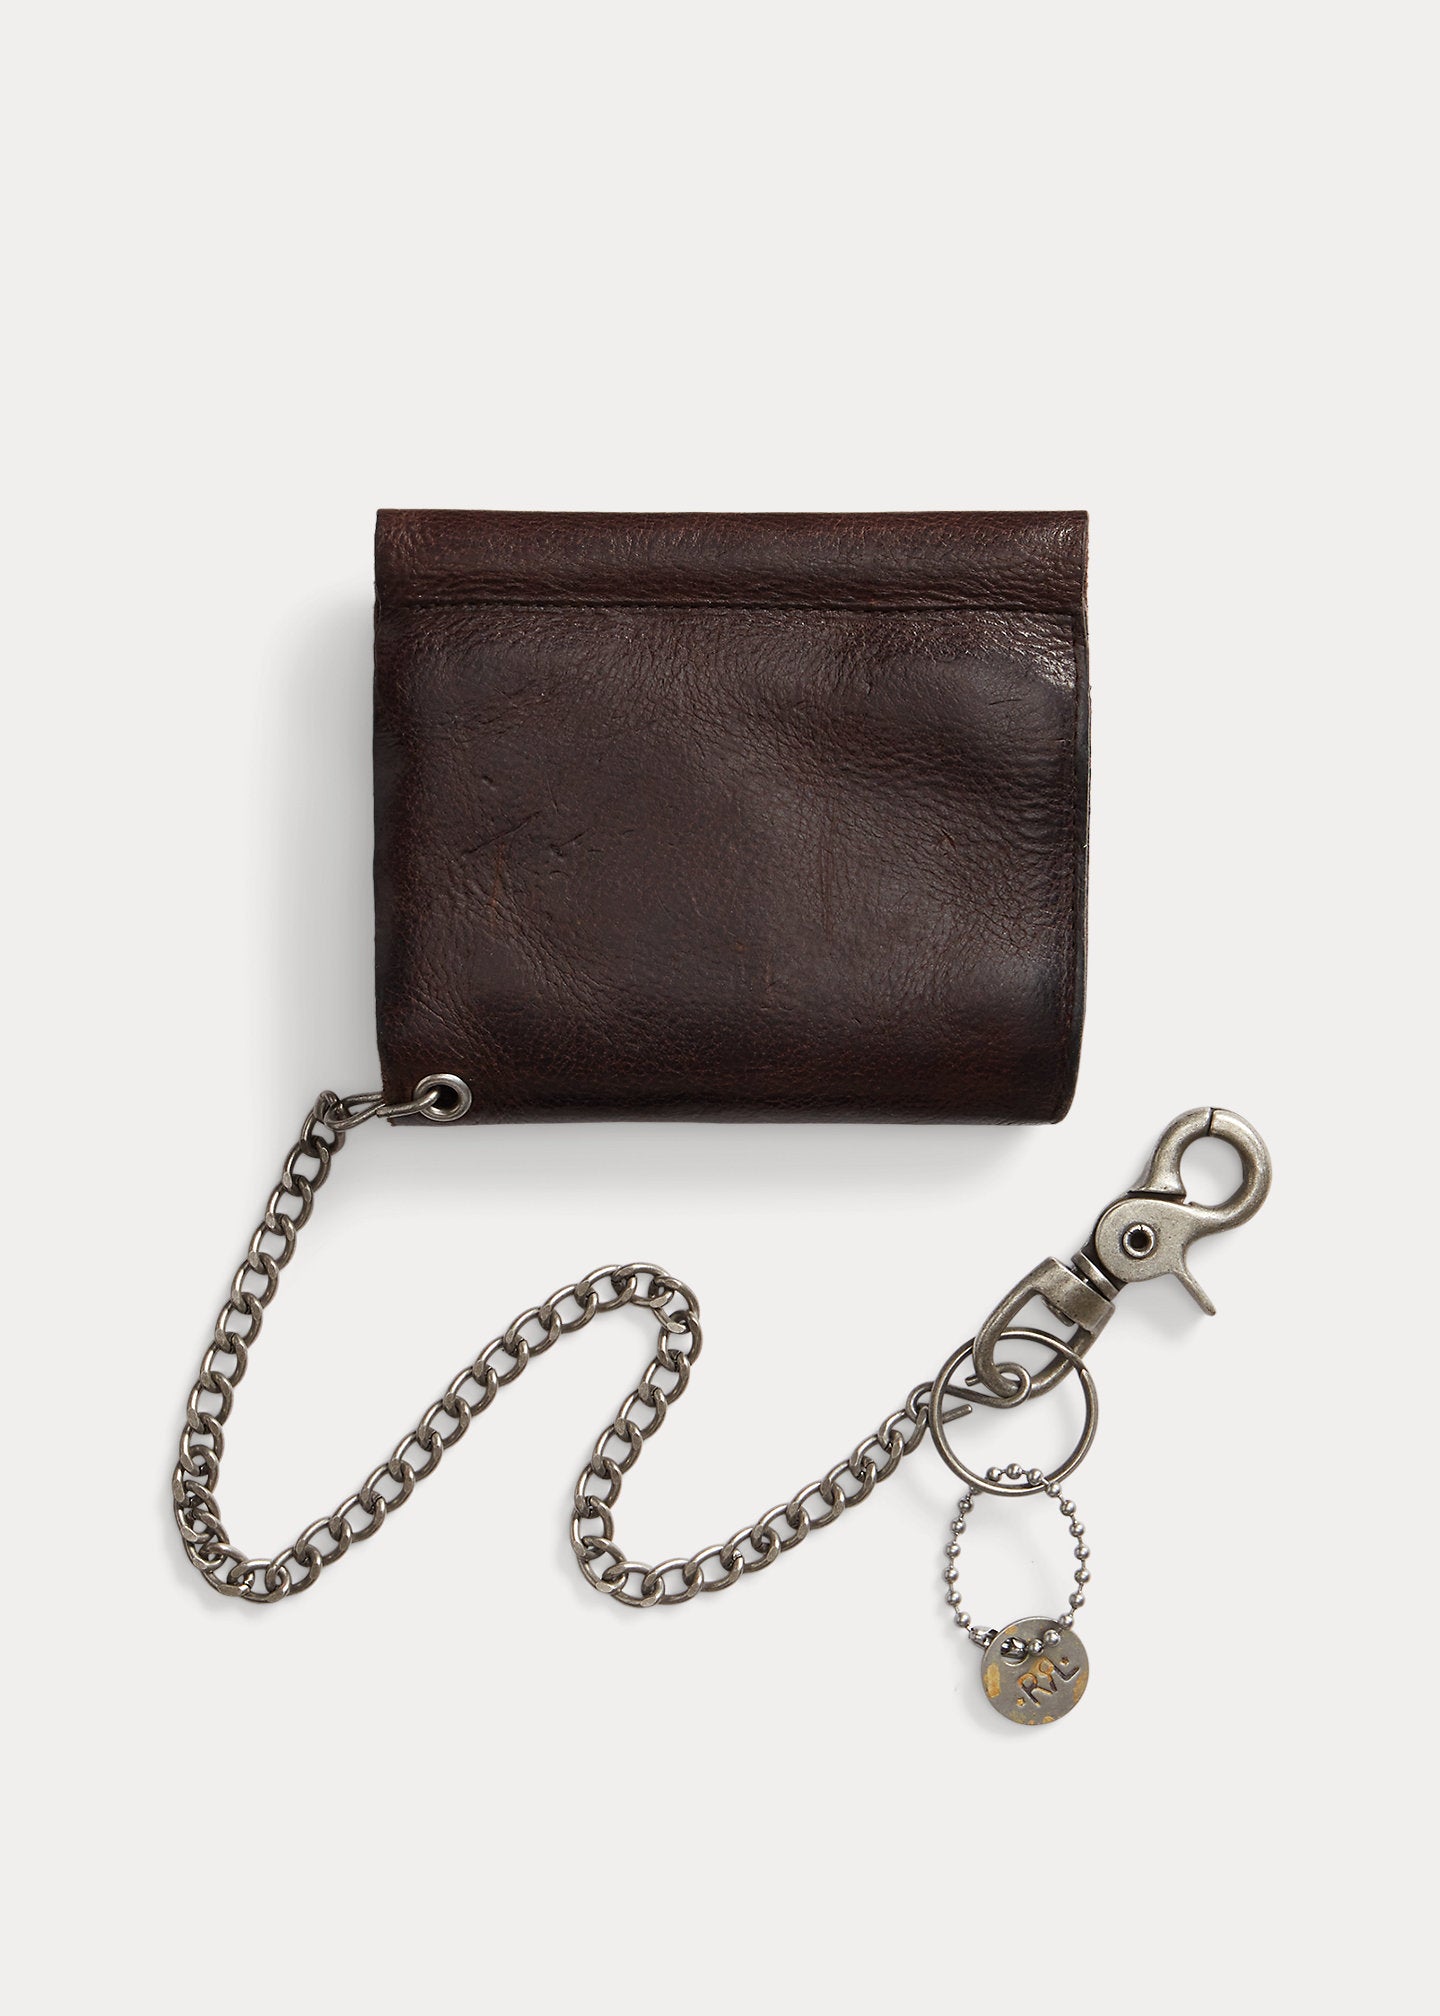 RRL Leather Chain Wallet